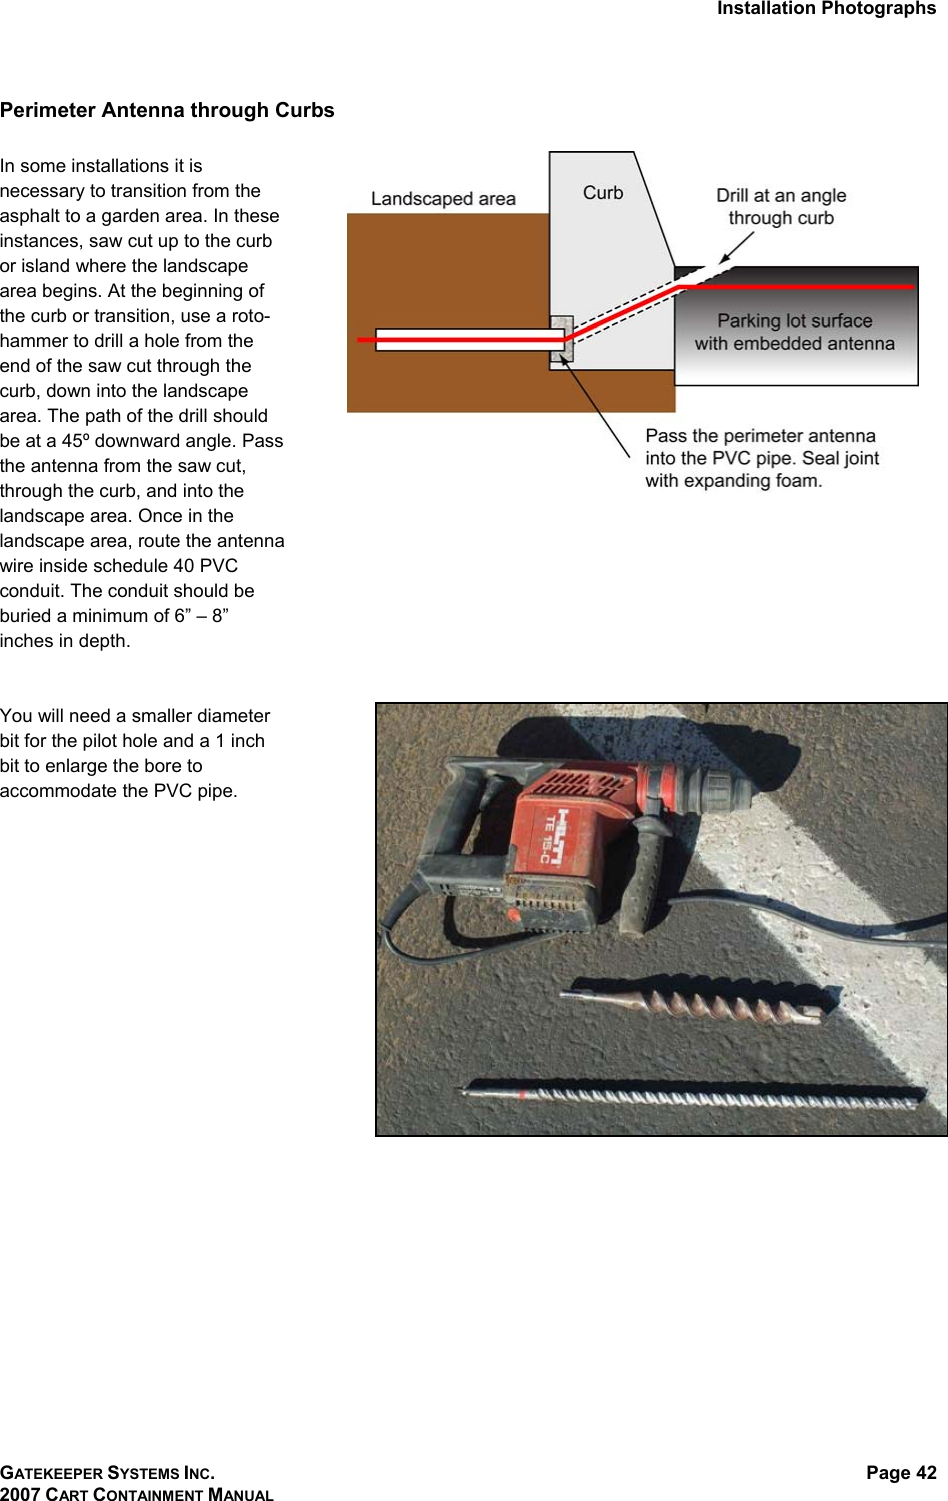 Installation Photographs GATEKEEPER SYSTEMS INC. 2007 CART CONTAINMENT MANUAL Page 42  Perimeter Antenna through Curbs   In some installations it is necessary to transition from the asphalt to a garden area. In these instances, saw cut up to the curb or island where the landscape area begins. At the beginning of the curb or transition, use a roto-hammer to drill a hole from the end of the saw cut through the curb, down into the landscape area. The path of the drill should be at a 45º downward angle. Pass the antenna from the saw cut, through the curb, and into the landscape area. Once in the landscape area, route the antenna wire inside schedule 40 PVC conduit. The conduit should be buried a minimum of 6” – 8” inches in depth.    You will need a smaller diameter bit for the pilot hole and a 1 inch bit to enlarge the bore to accommodate the PVC pipe.   